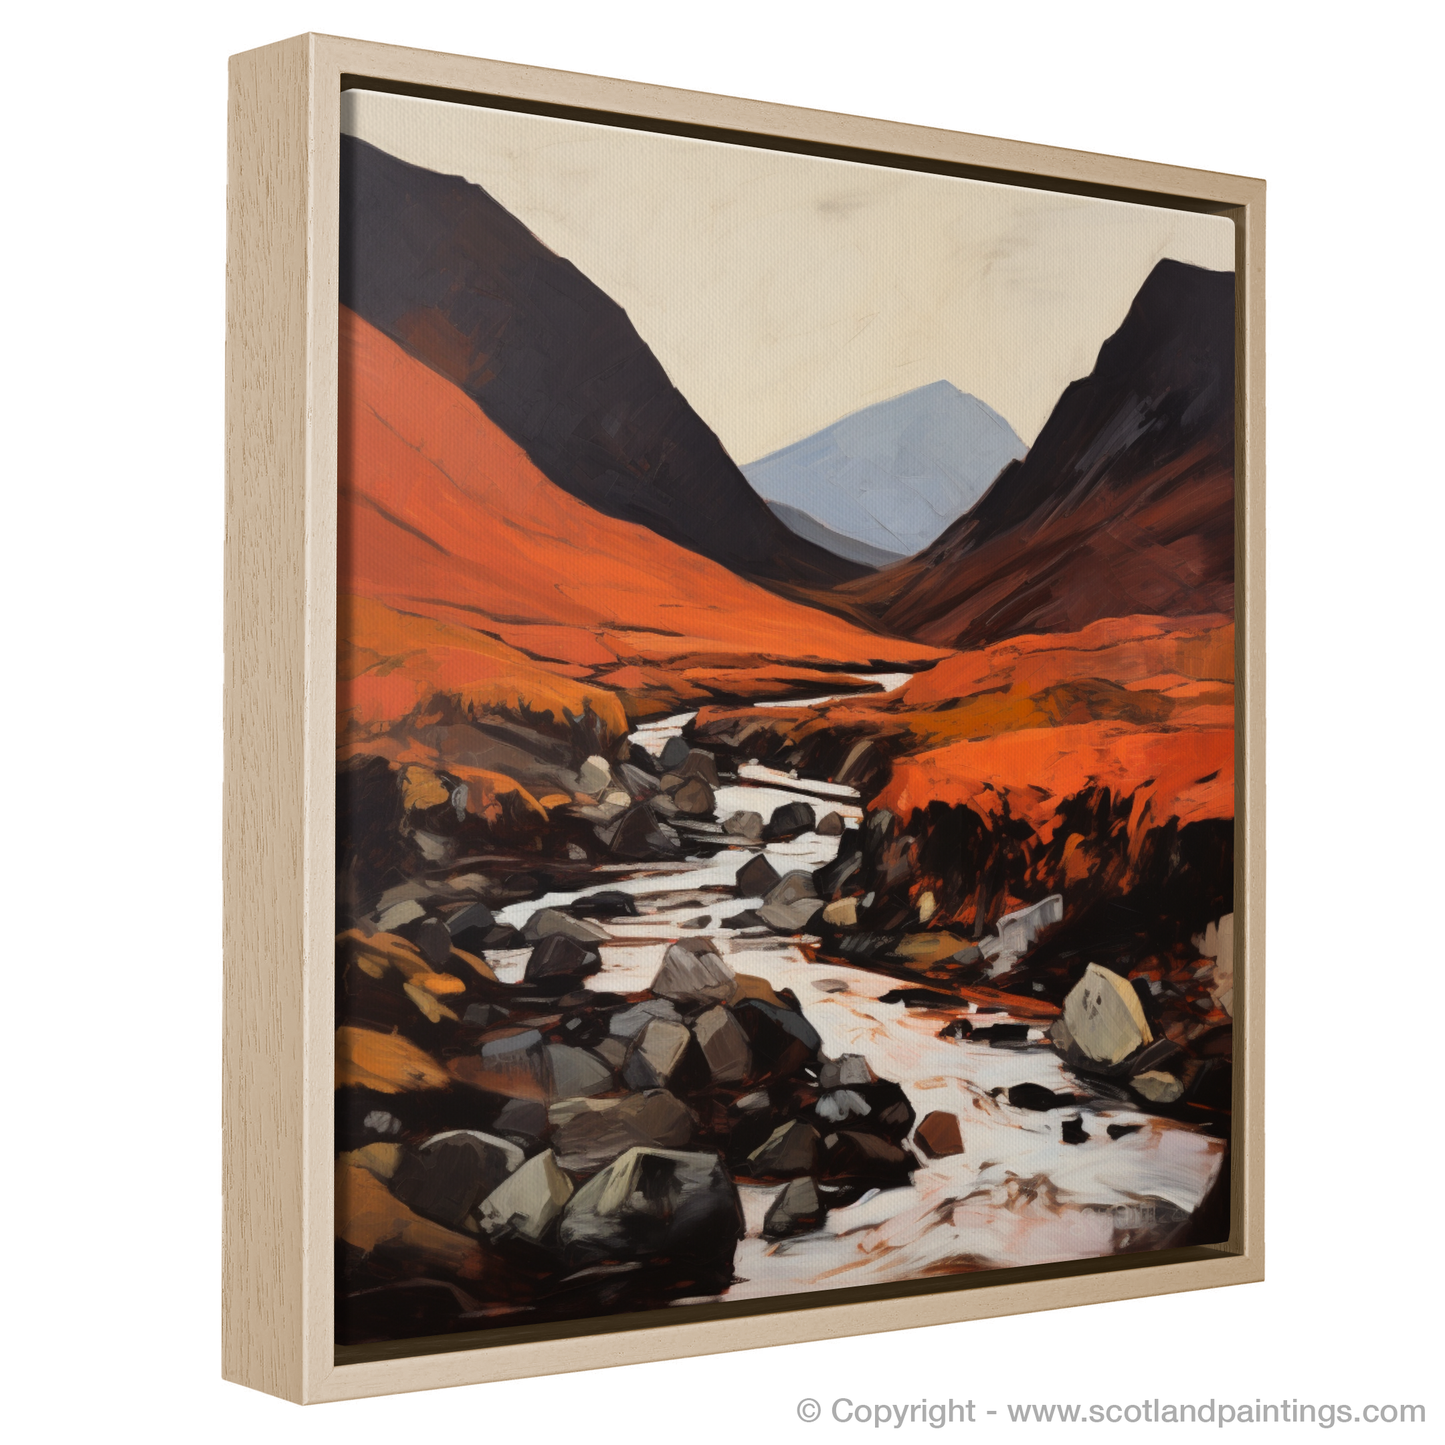 Painting and Art Print of Glen Rosa, Isle of Arran entitled "Fiery Embrace of Glen Rosa".